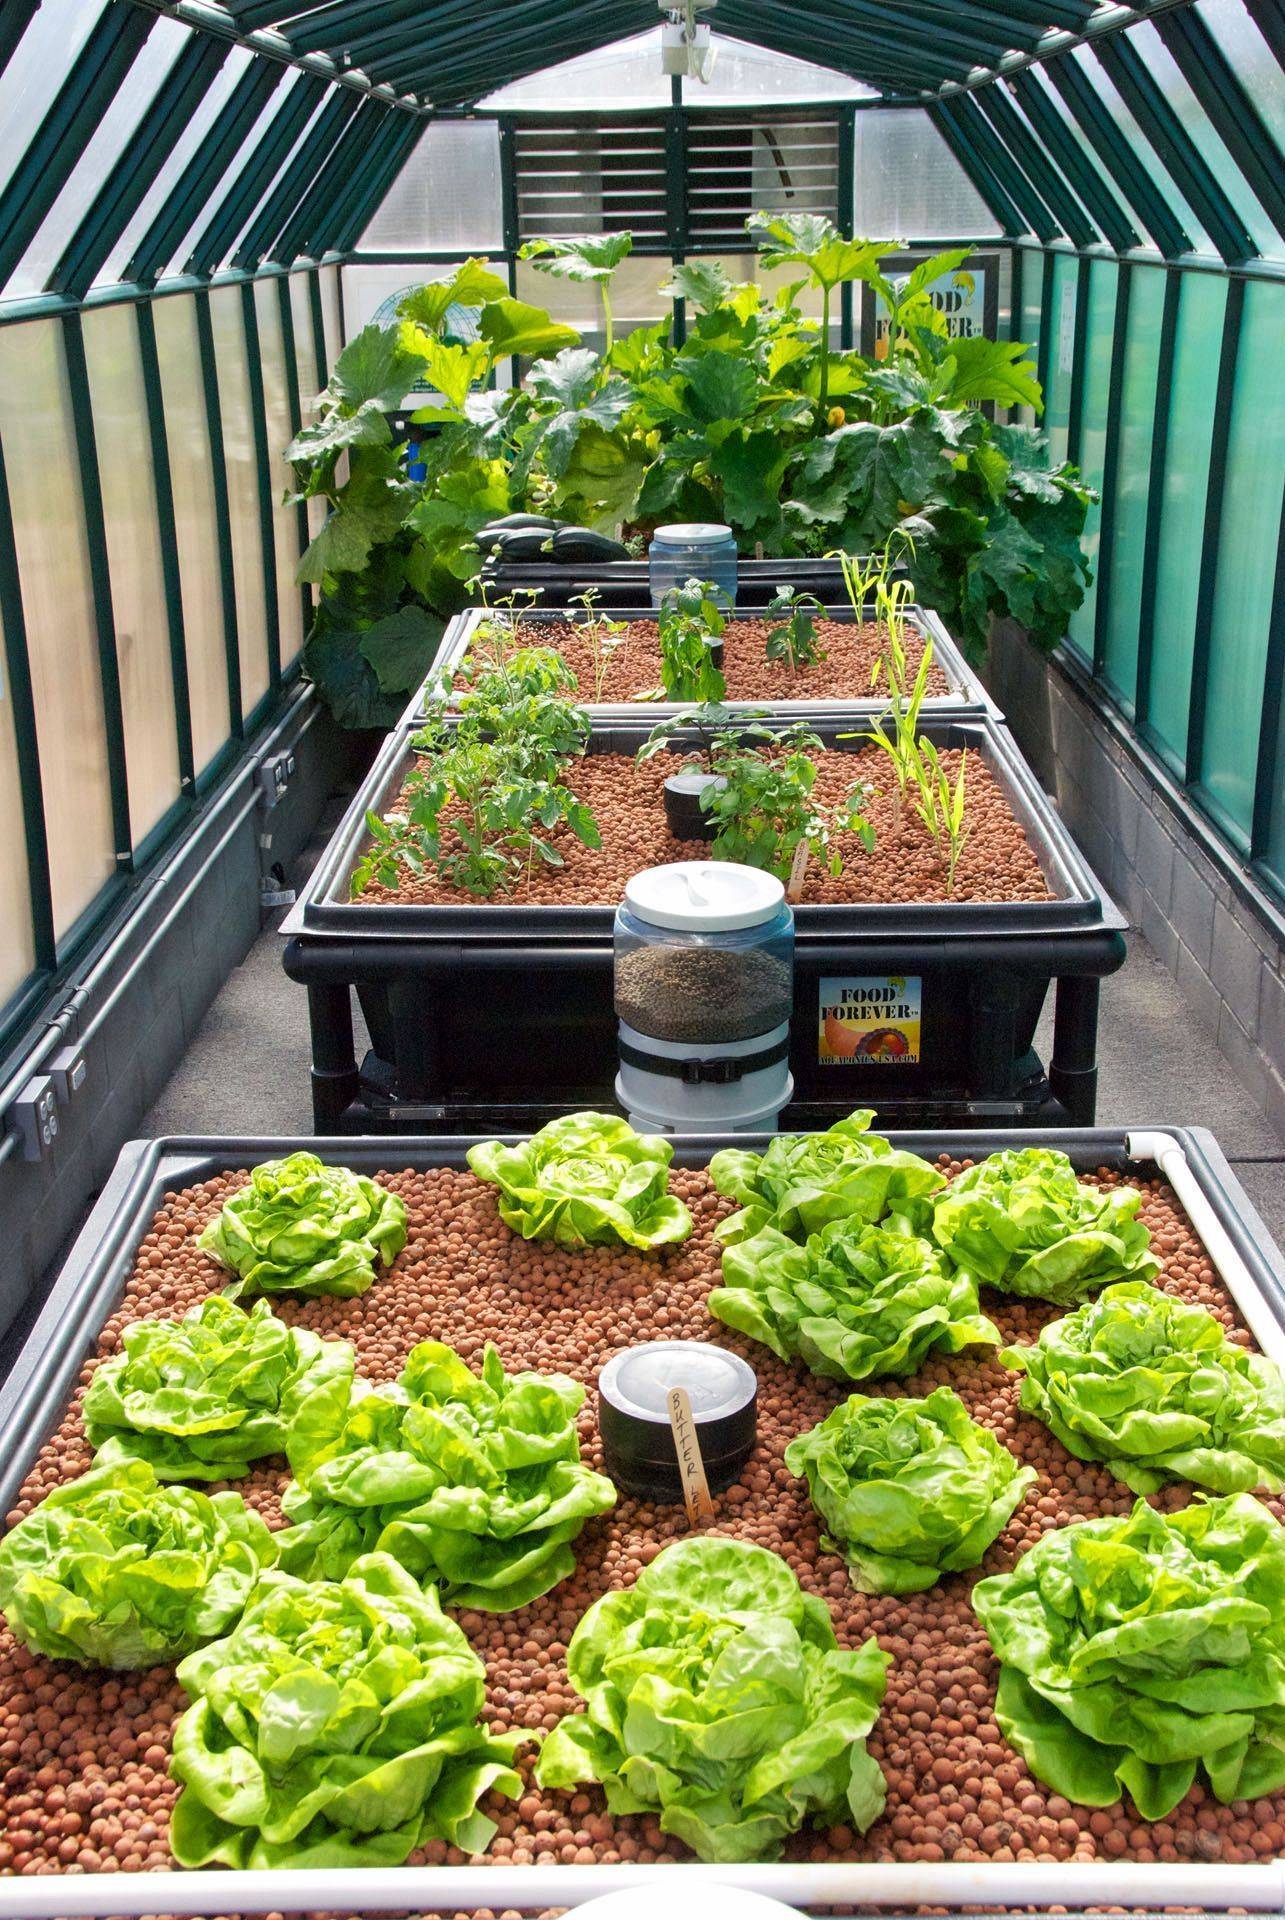 How To Diy Aquaponics The How To Diy Guide On Building Your Very Own